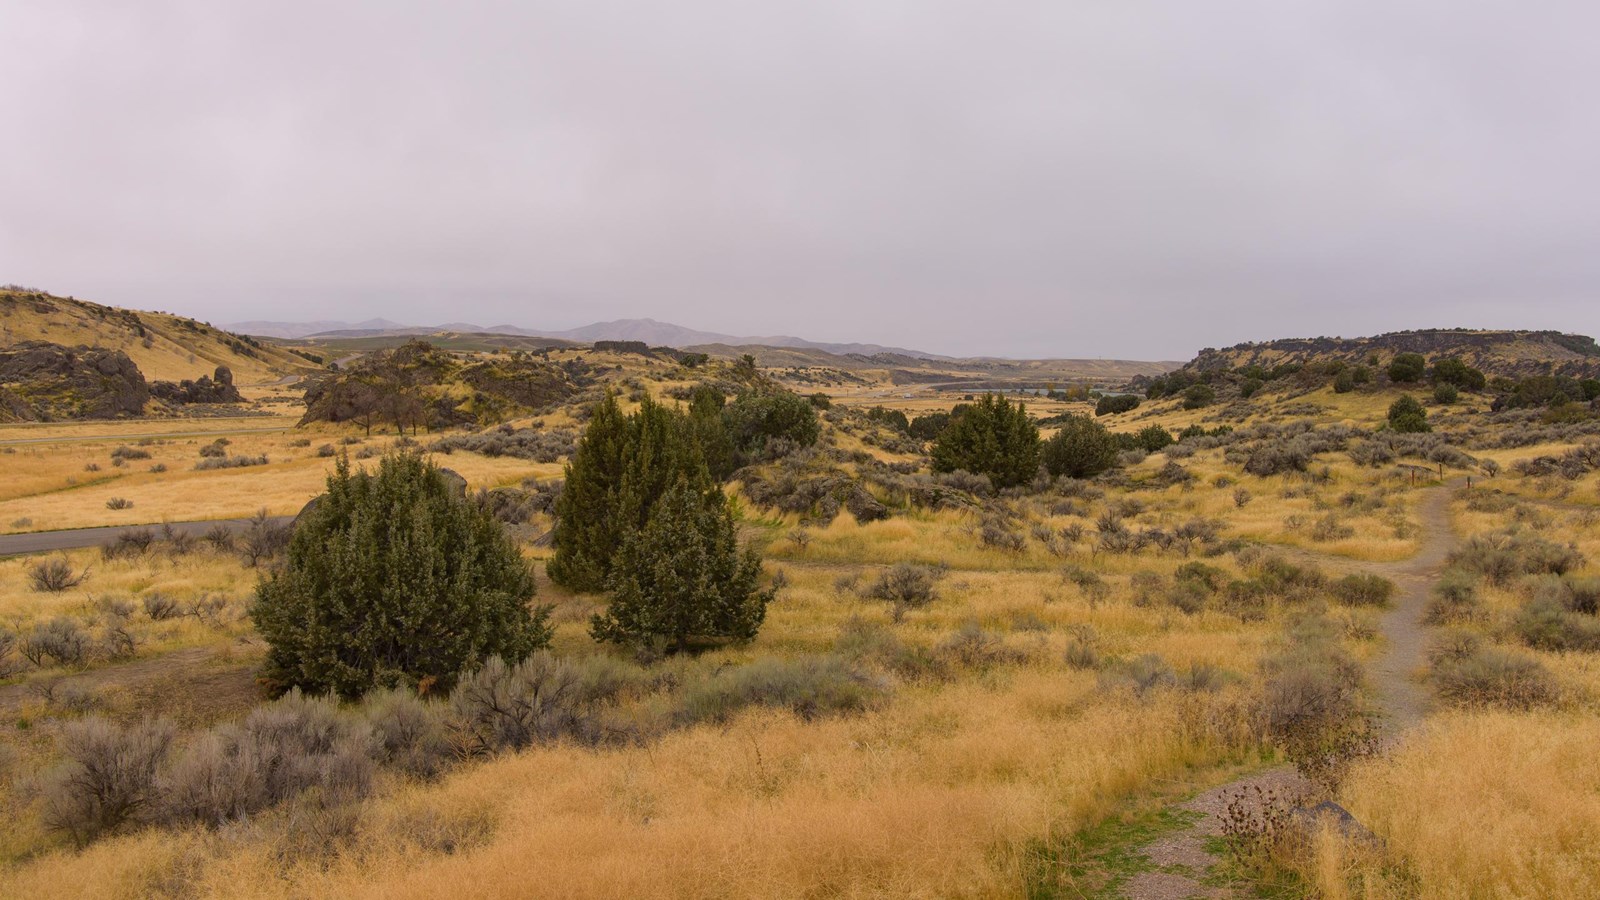 A path leads through a grassy area dotted with shrubs under a cloudy sky.